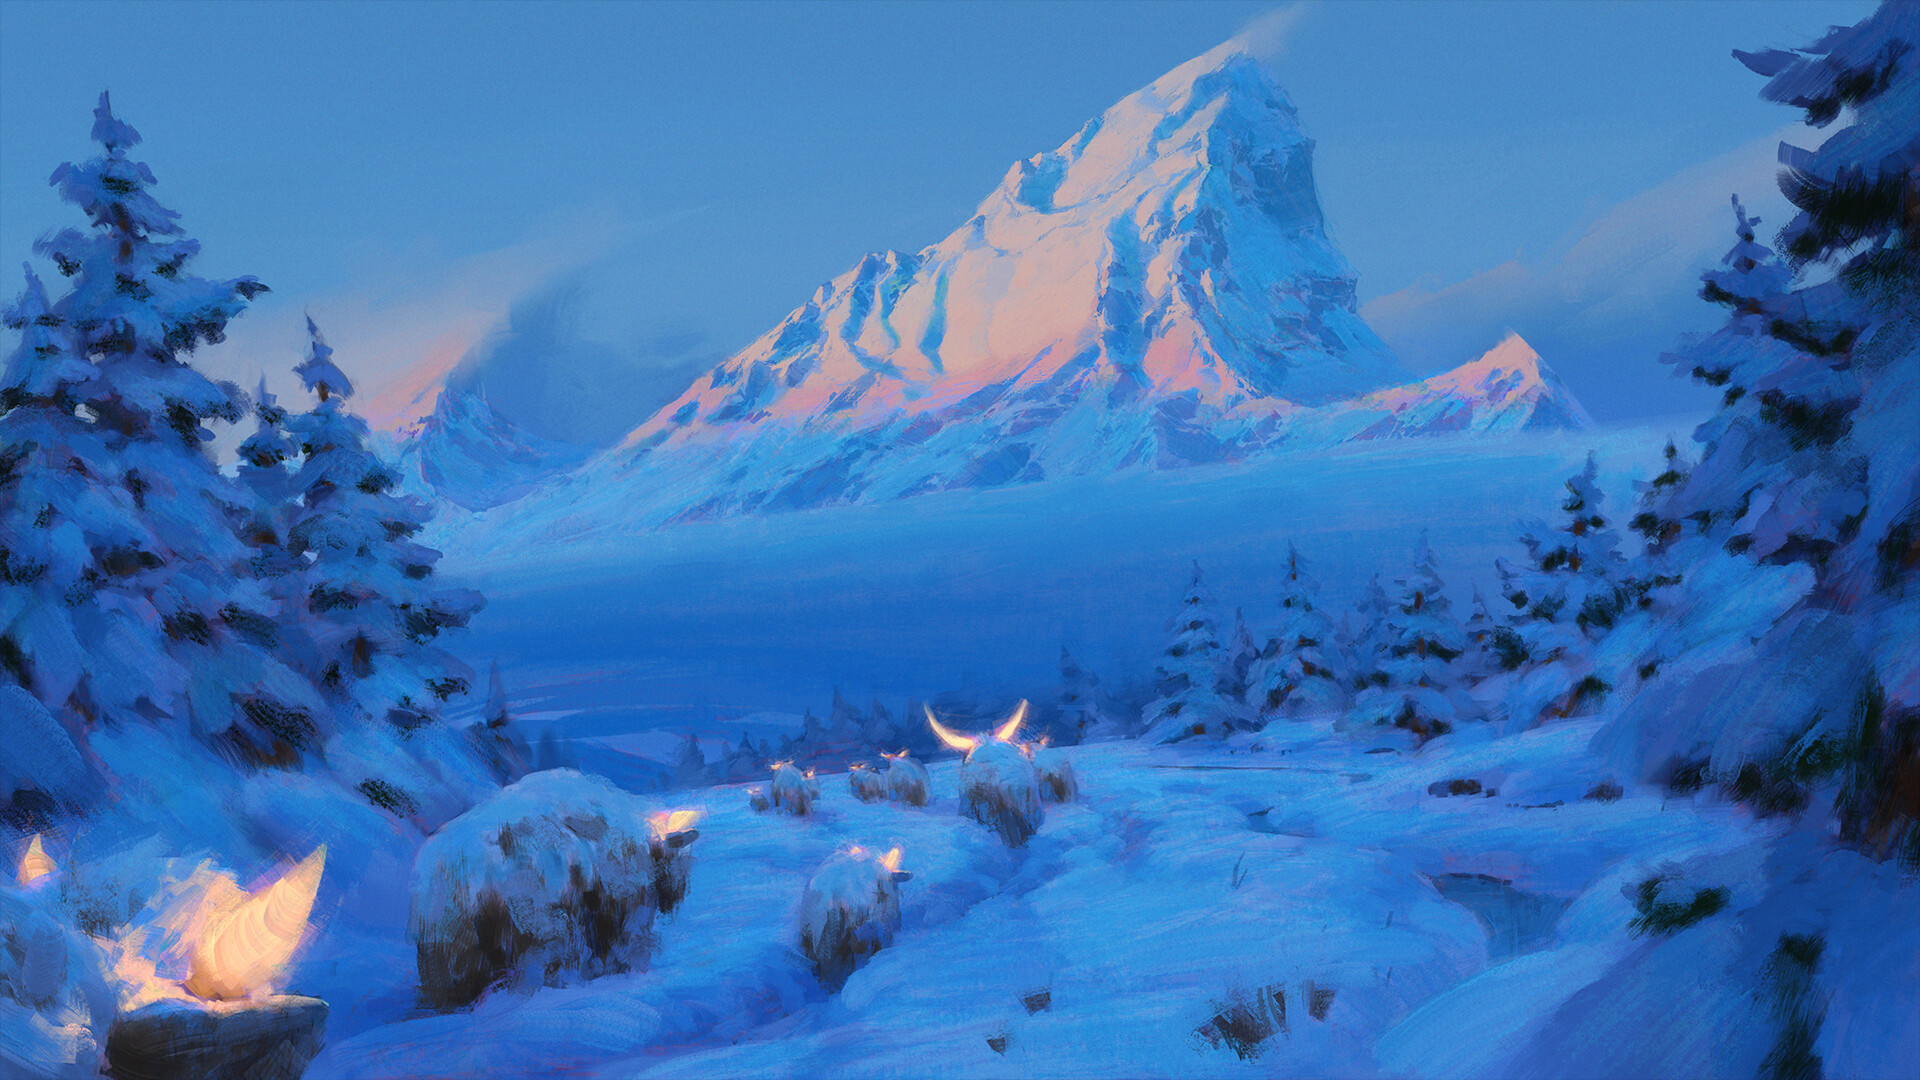 Environment Glowing Horns Mountains Snow Trees Bison Fantasy Art Artwork Nature 1920x1080